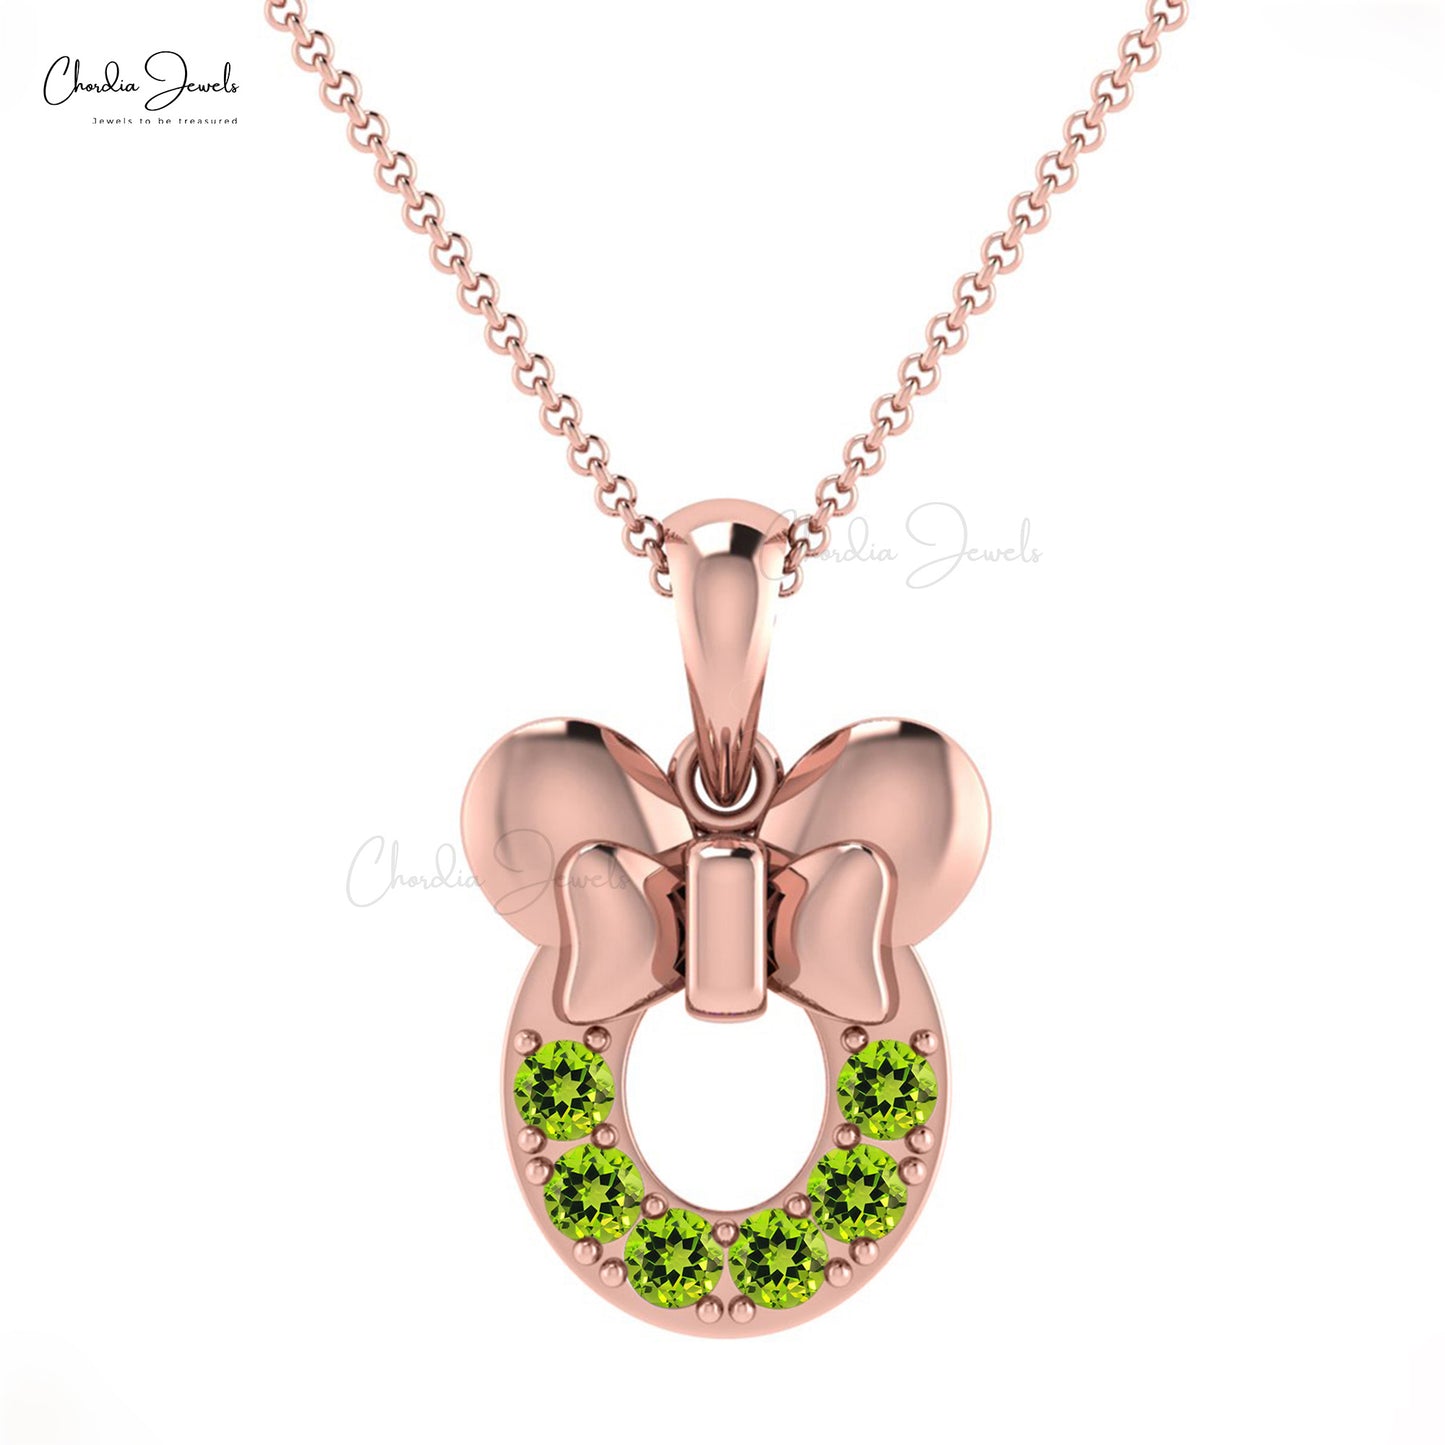 Exquisite Cartoon Dainty Disney Pendant Necklace Pendant Authentic Green Peridot Mickey Mouse Pendant in 14k Solid Gold Birthday Gift For Daughter